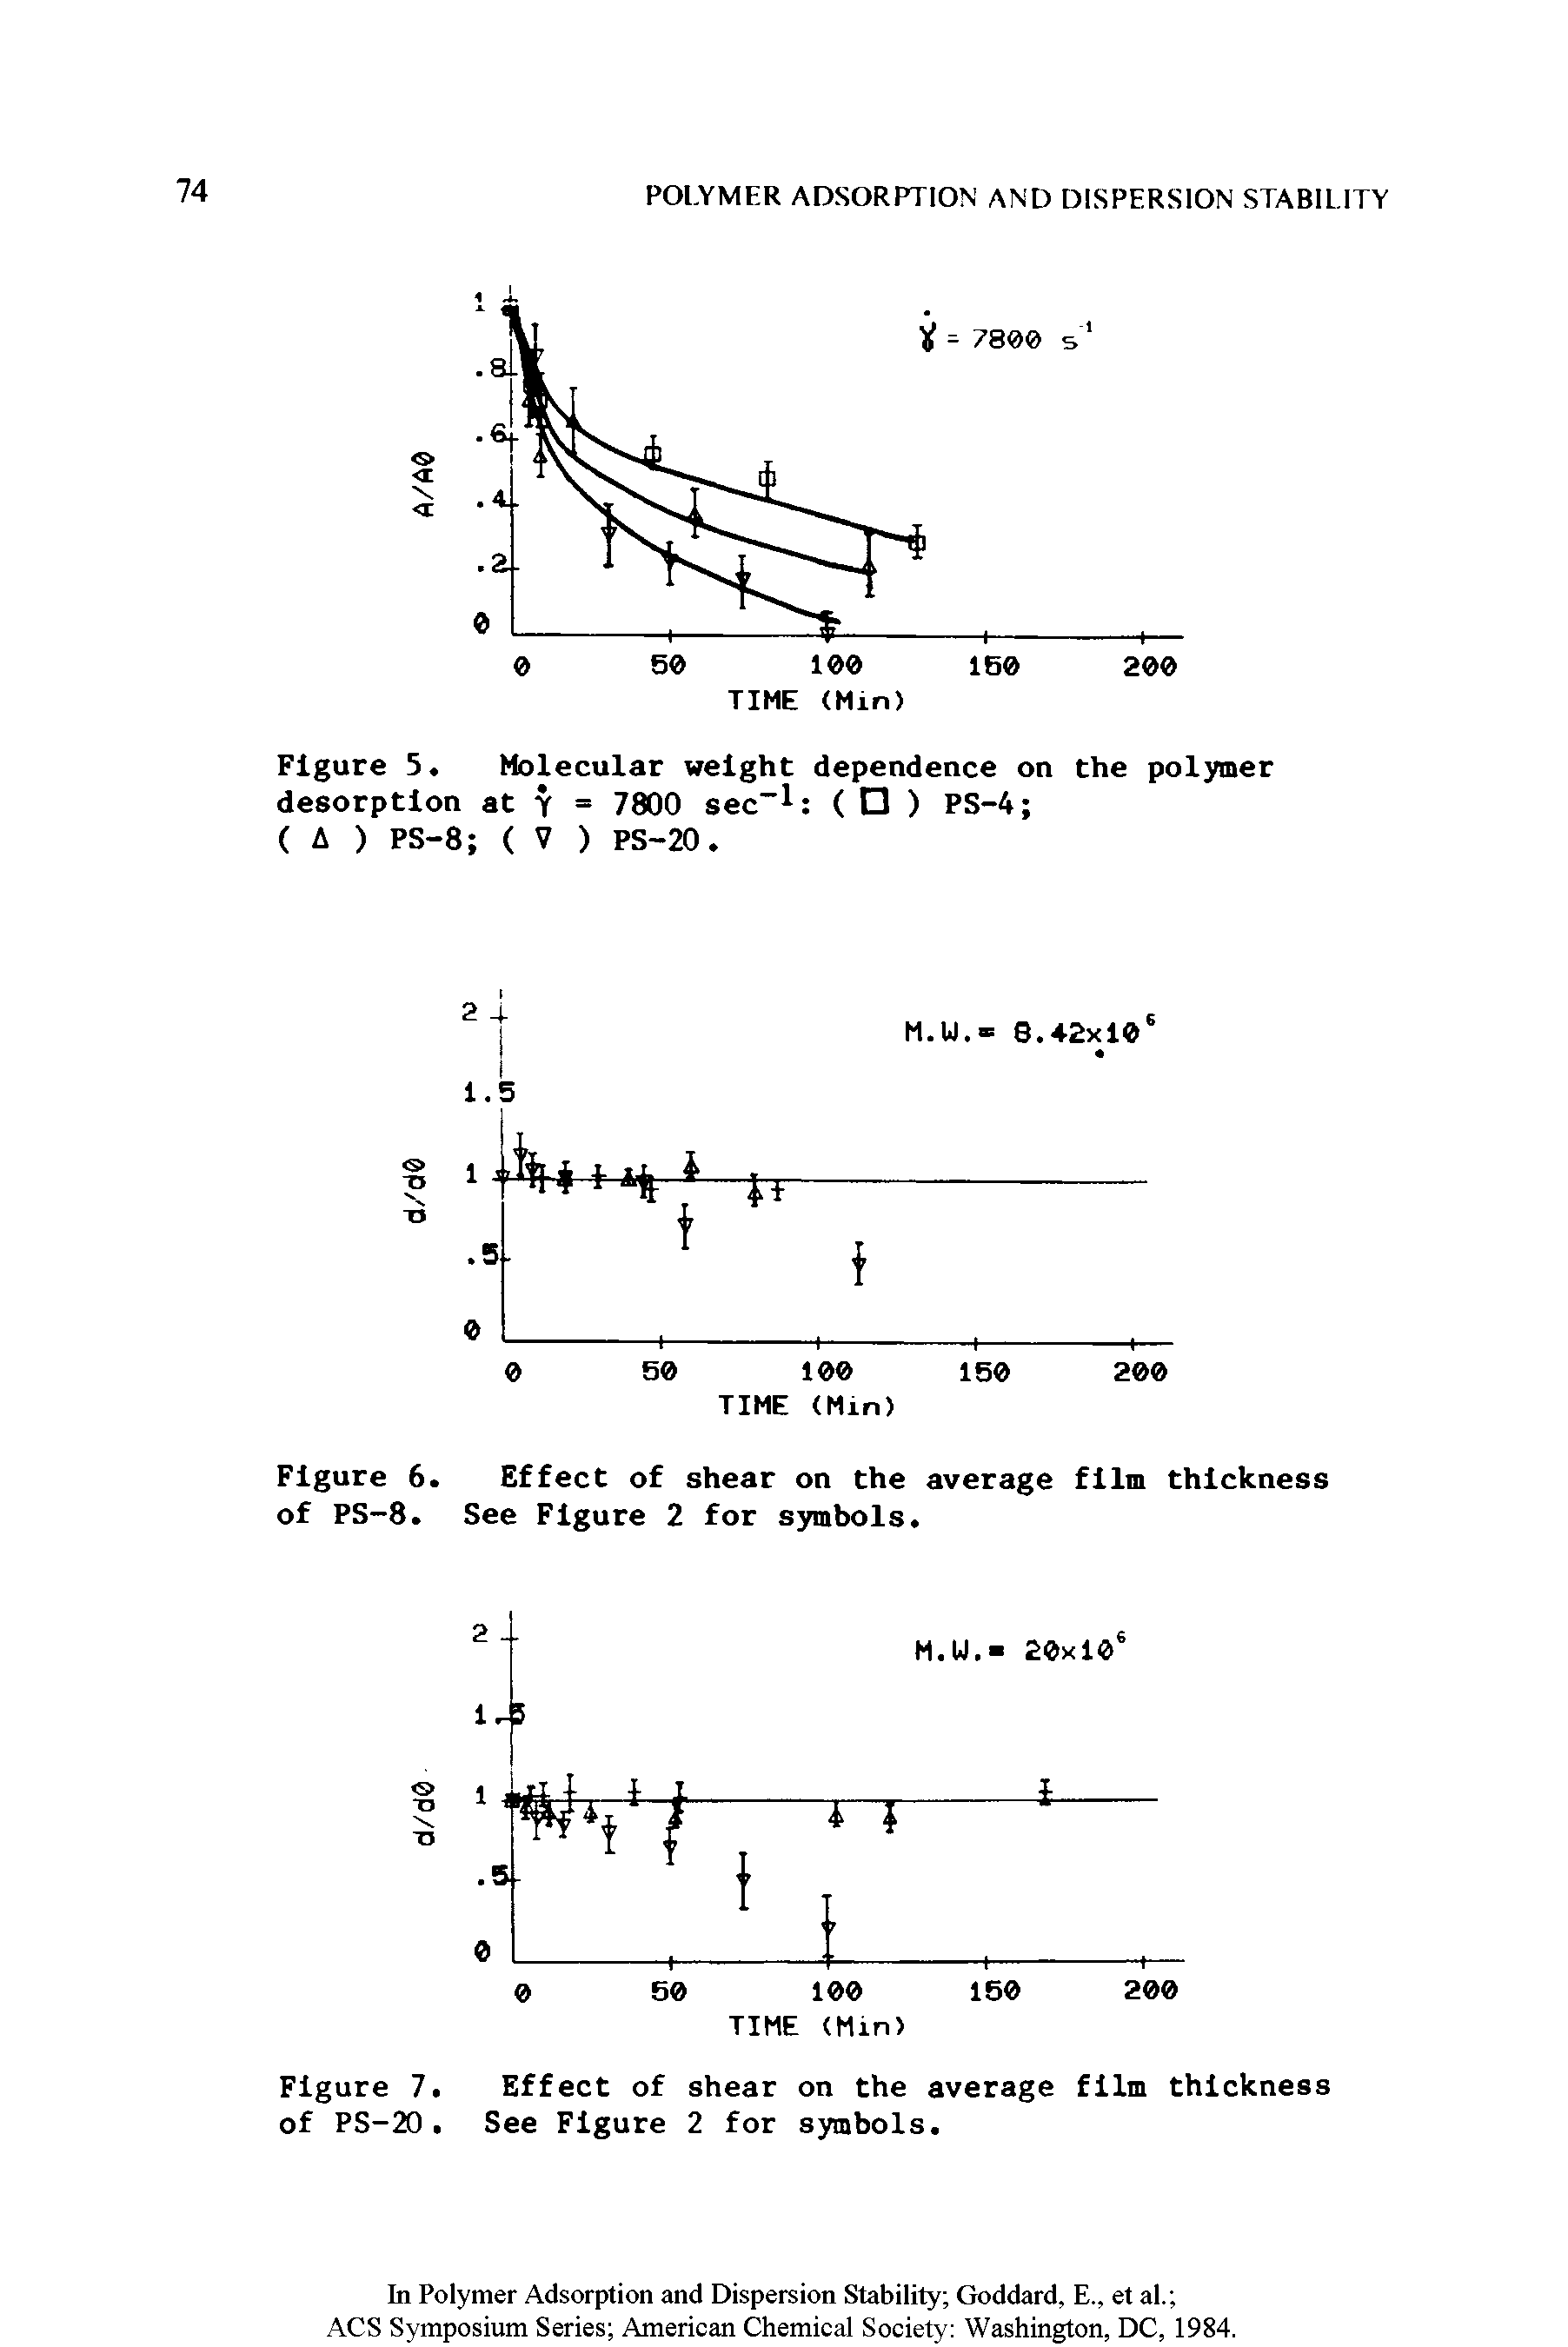 Figure 6. Effect of shear on the average film thickness of PS-8. See Figure 2 for symbols.